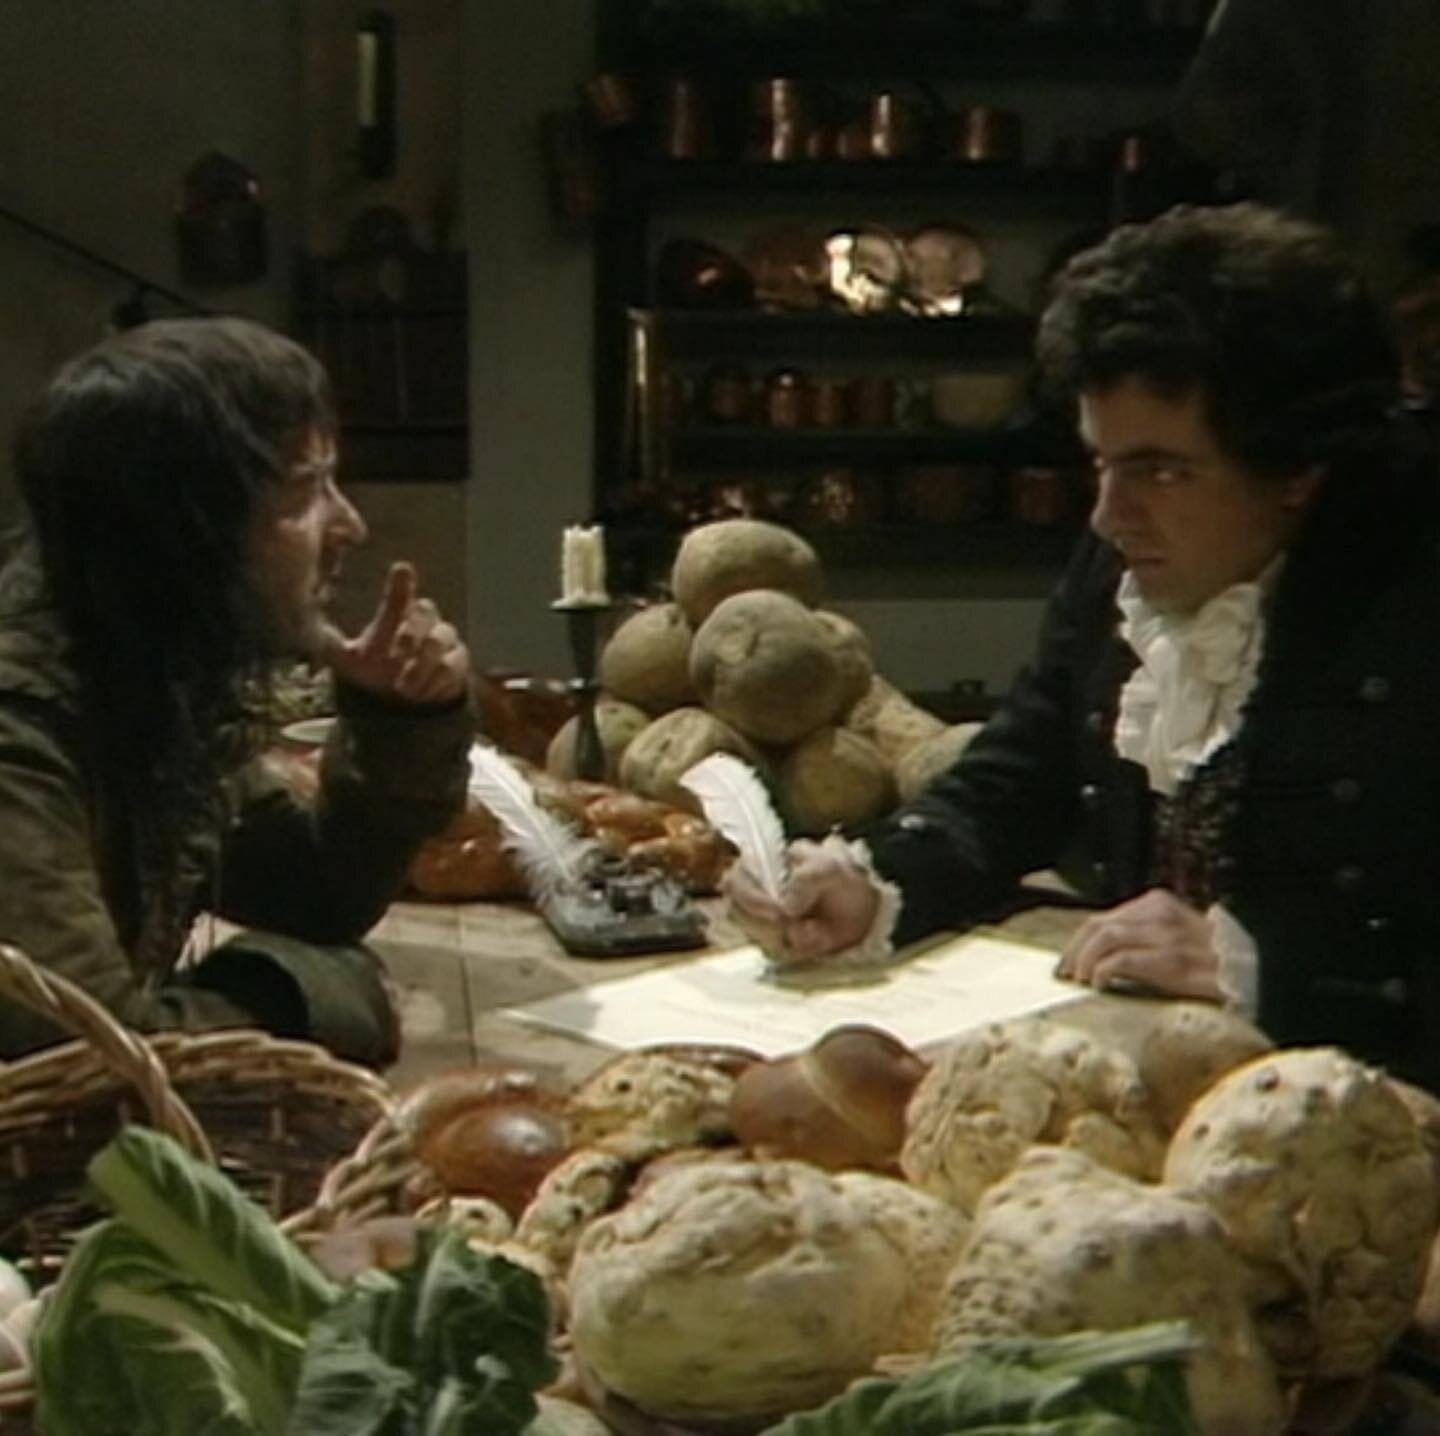 We always knew The Ugly One had star quality... thanks to one of our team Theo Perowne for this &lsquo;celebrity&rsquo; celeriac spot in the much adored Blackadder back in the 80s. Perhaps Blackadder and Baldrick were writing down a recipe for a deli